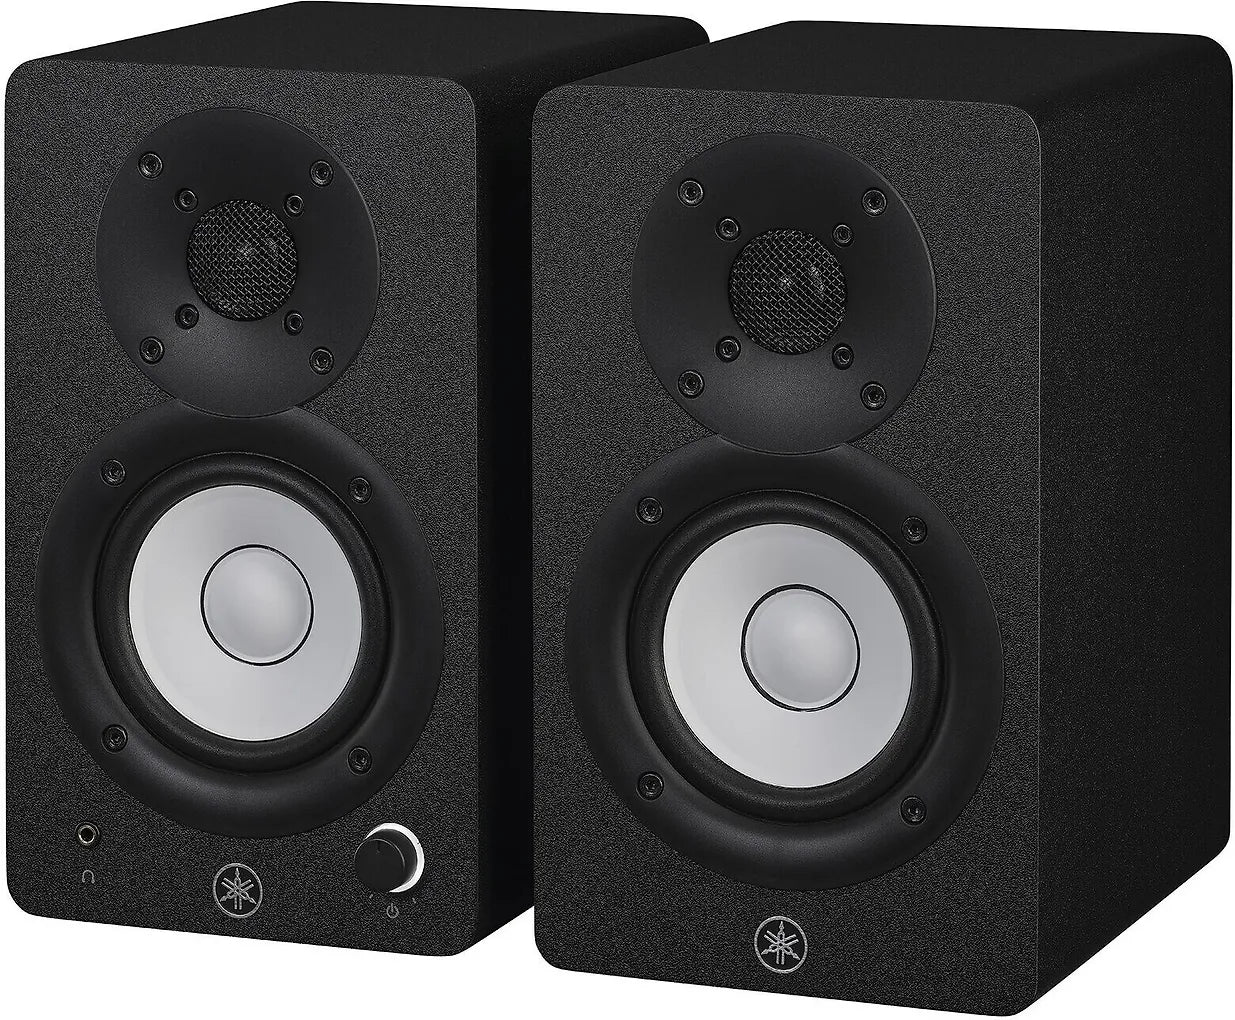 Pair of Yamaha HS3 active speakers